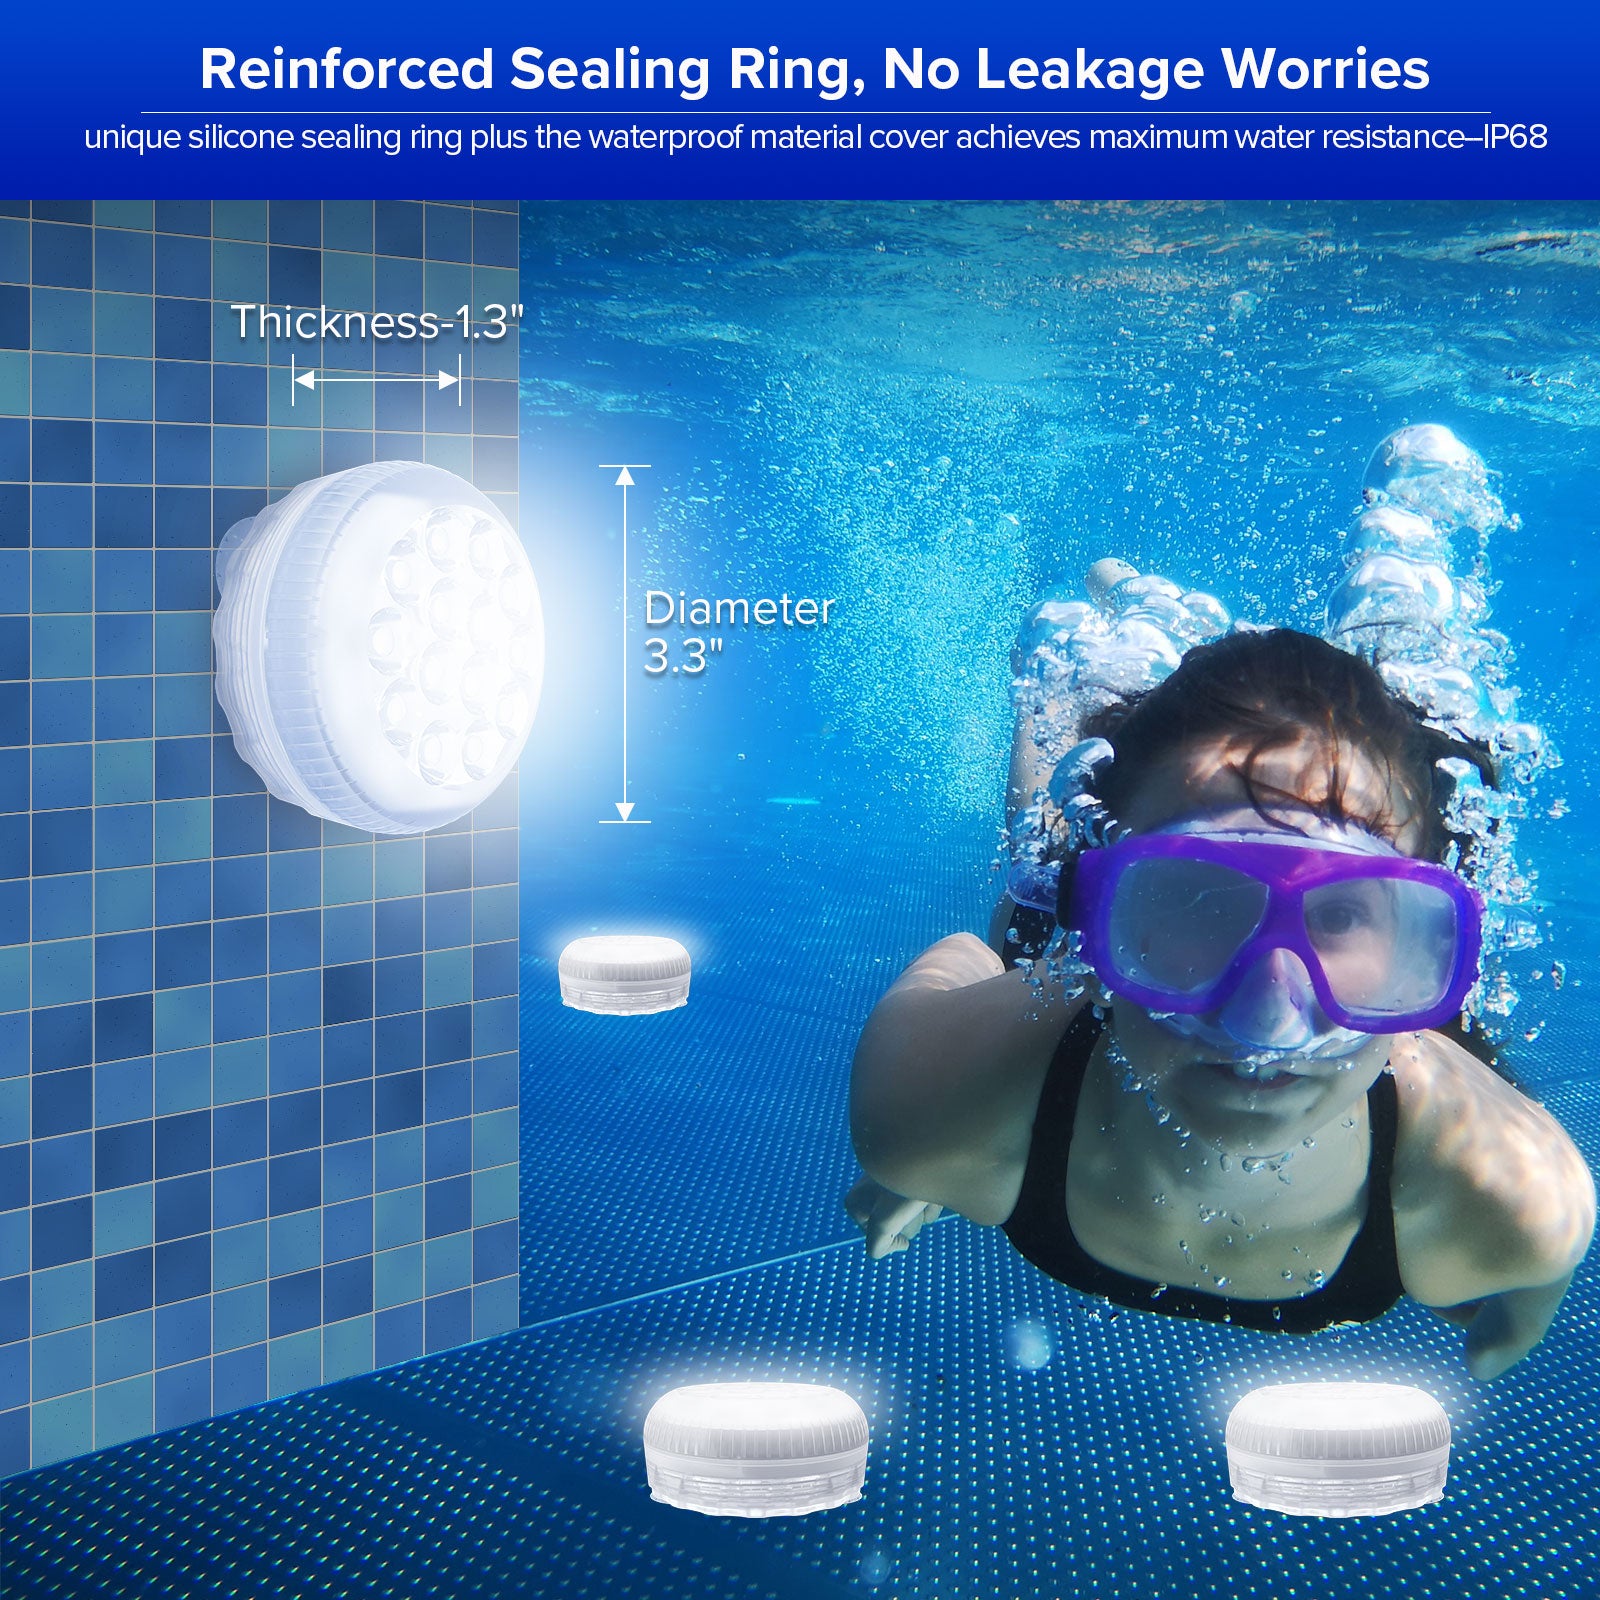 Upgraded RGB LED Submersible Pool Light (US ONLY) has reinforced sealing ring, no leakage worries,unique slicone sealing ring plus the waterproof materlal cover achieves maxlmum water resistance-IP68.